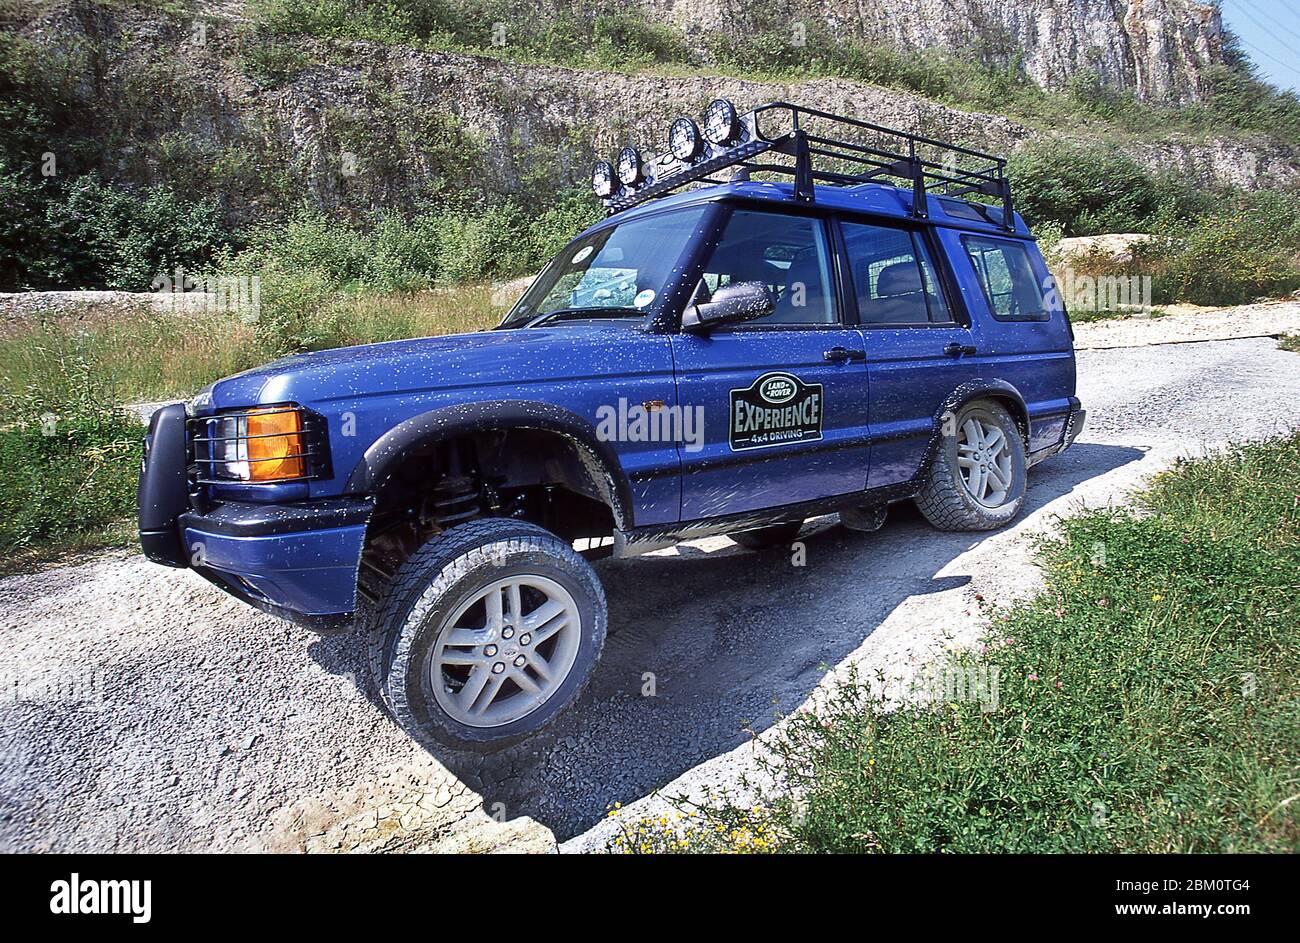 2002 Land Rover Discovery part of the Land Rover Experience at Bluewater Shopping centre Kent UK. 2002 Stock Photo